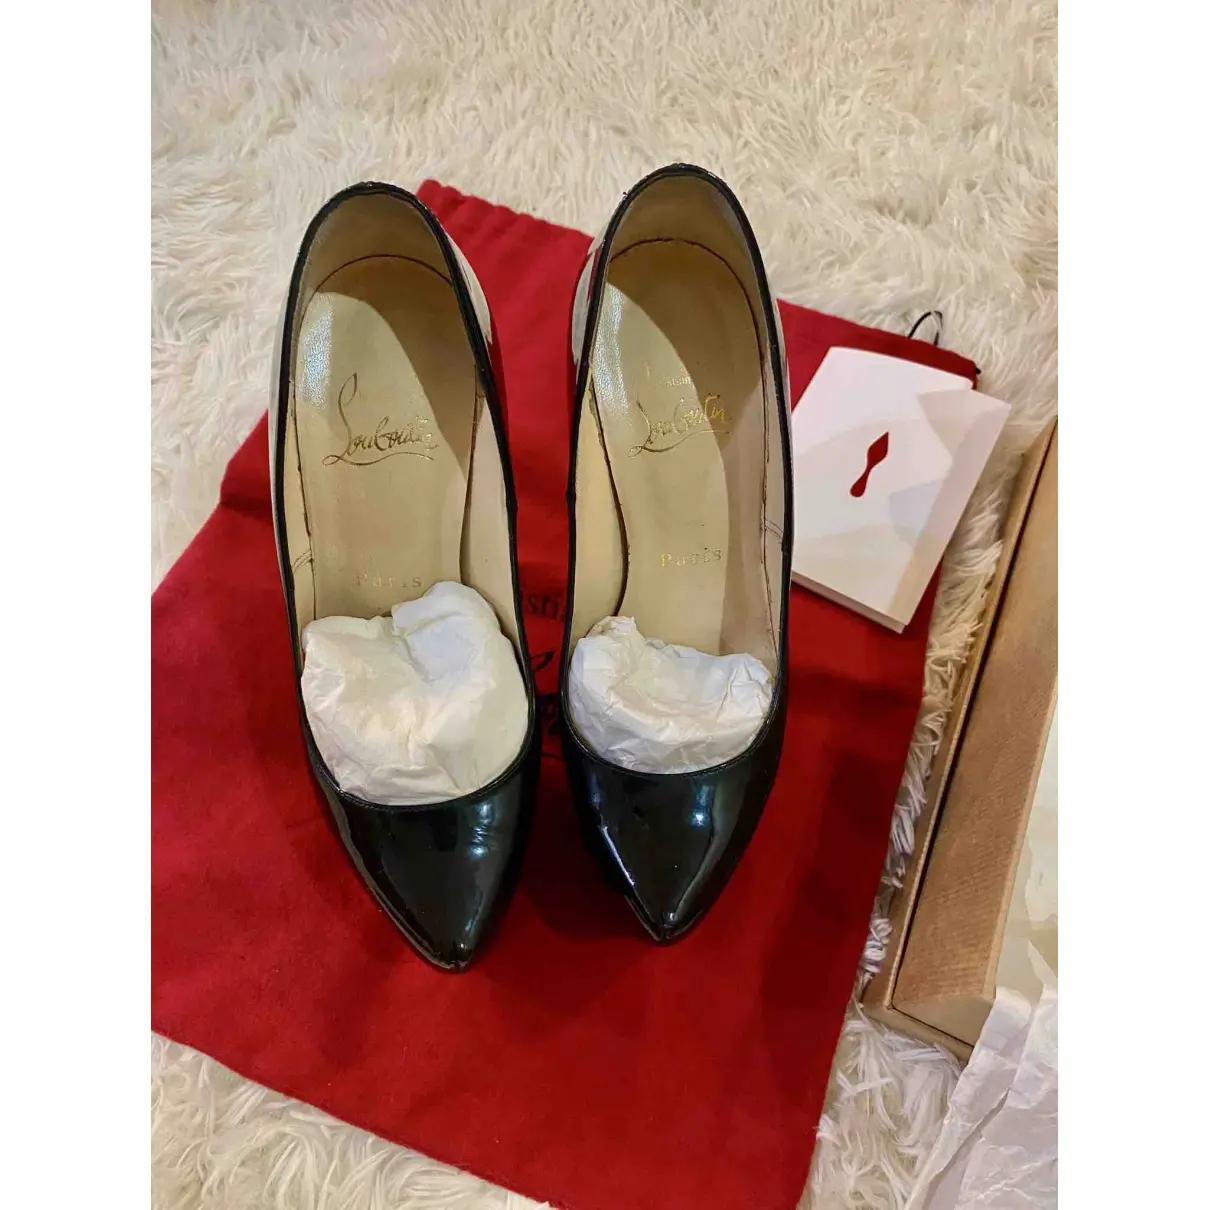 Buy Christian Louboutin Daffodile patent leather heels online